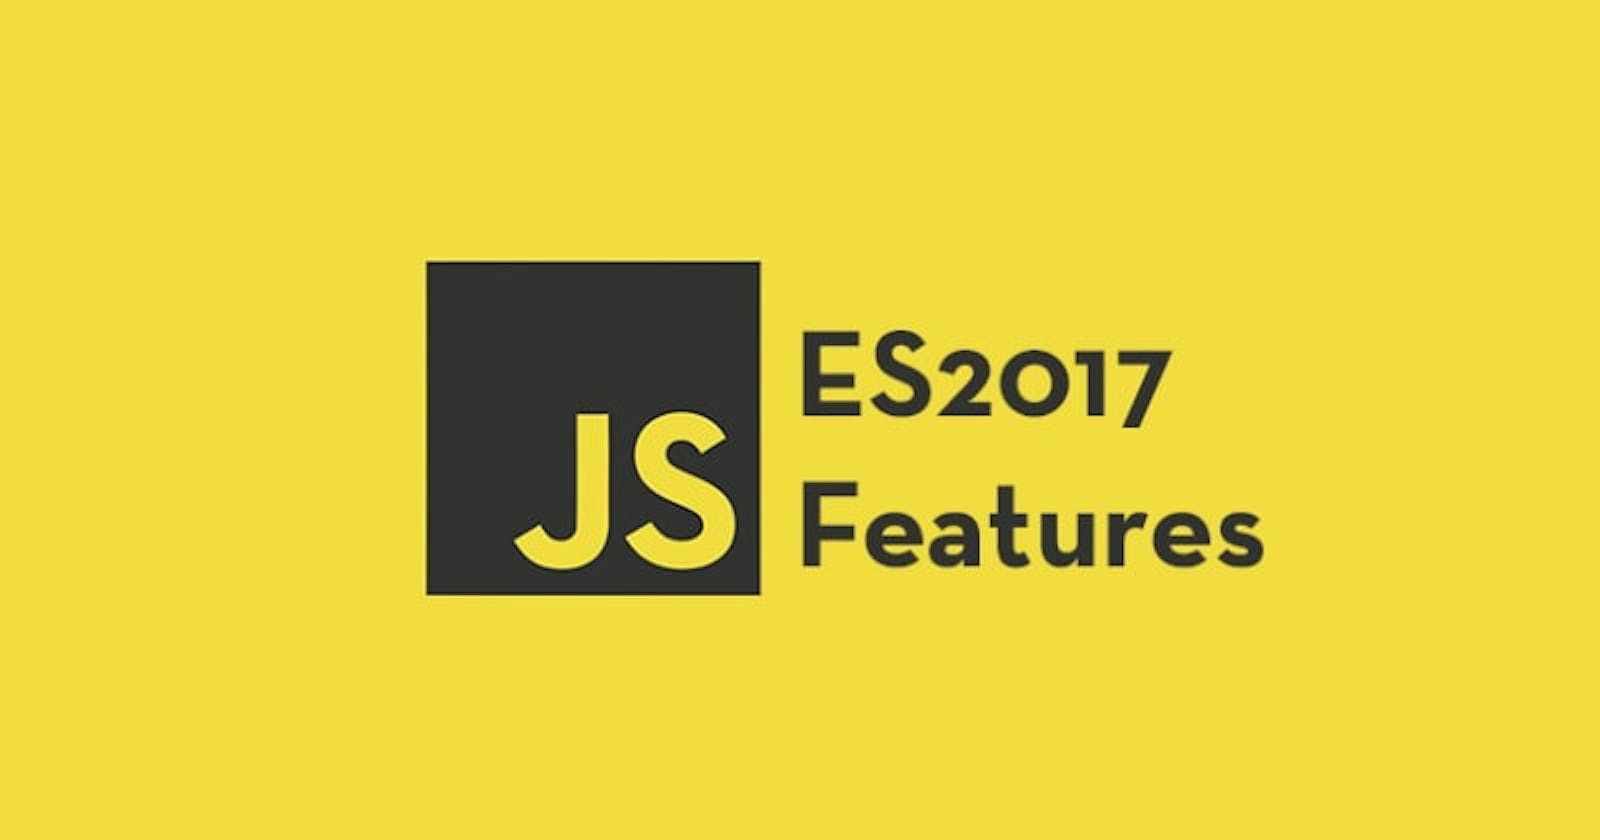 7 JavaScript ES2017 Features to Learn